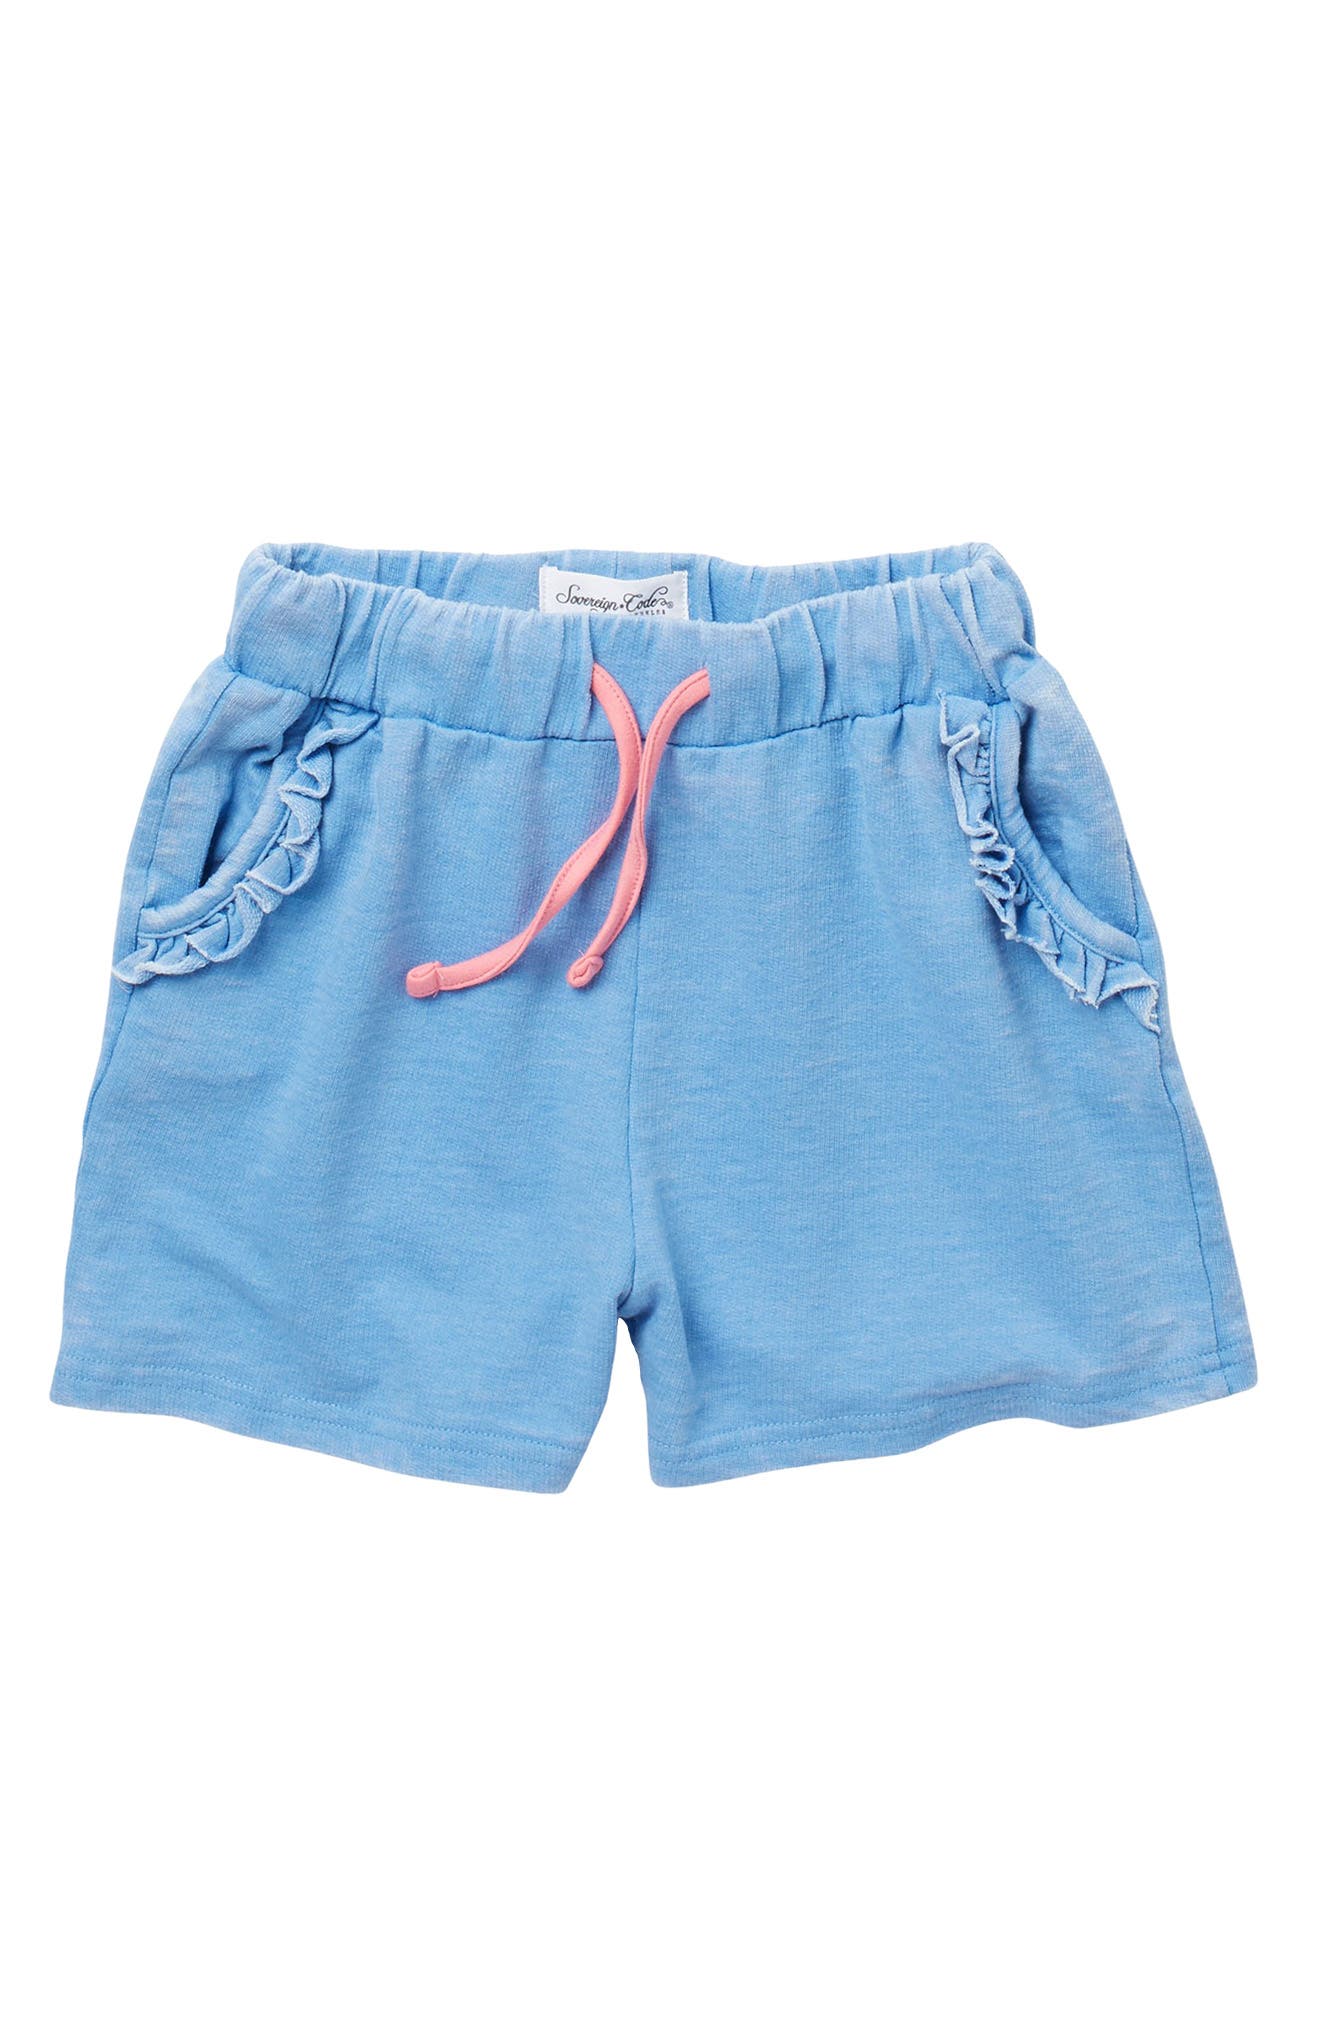 Sovereign Code Kids' Ruffled Pull-on Shorts In Deep Sea